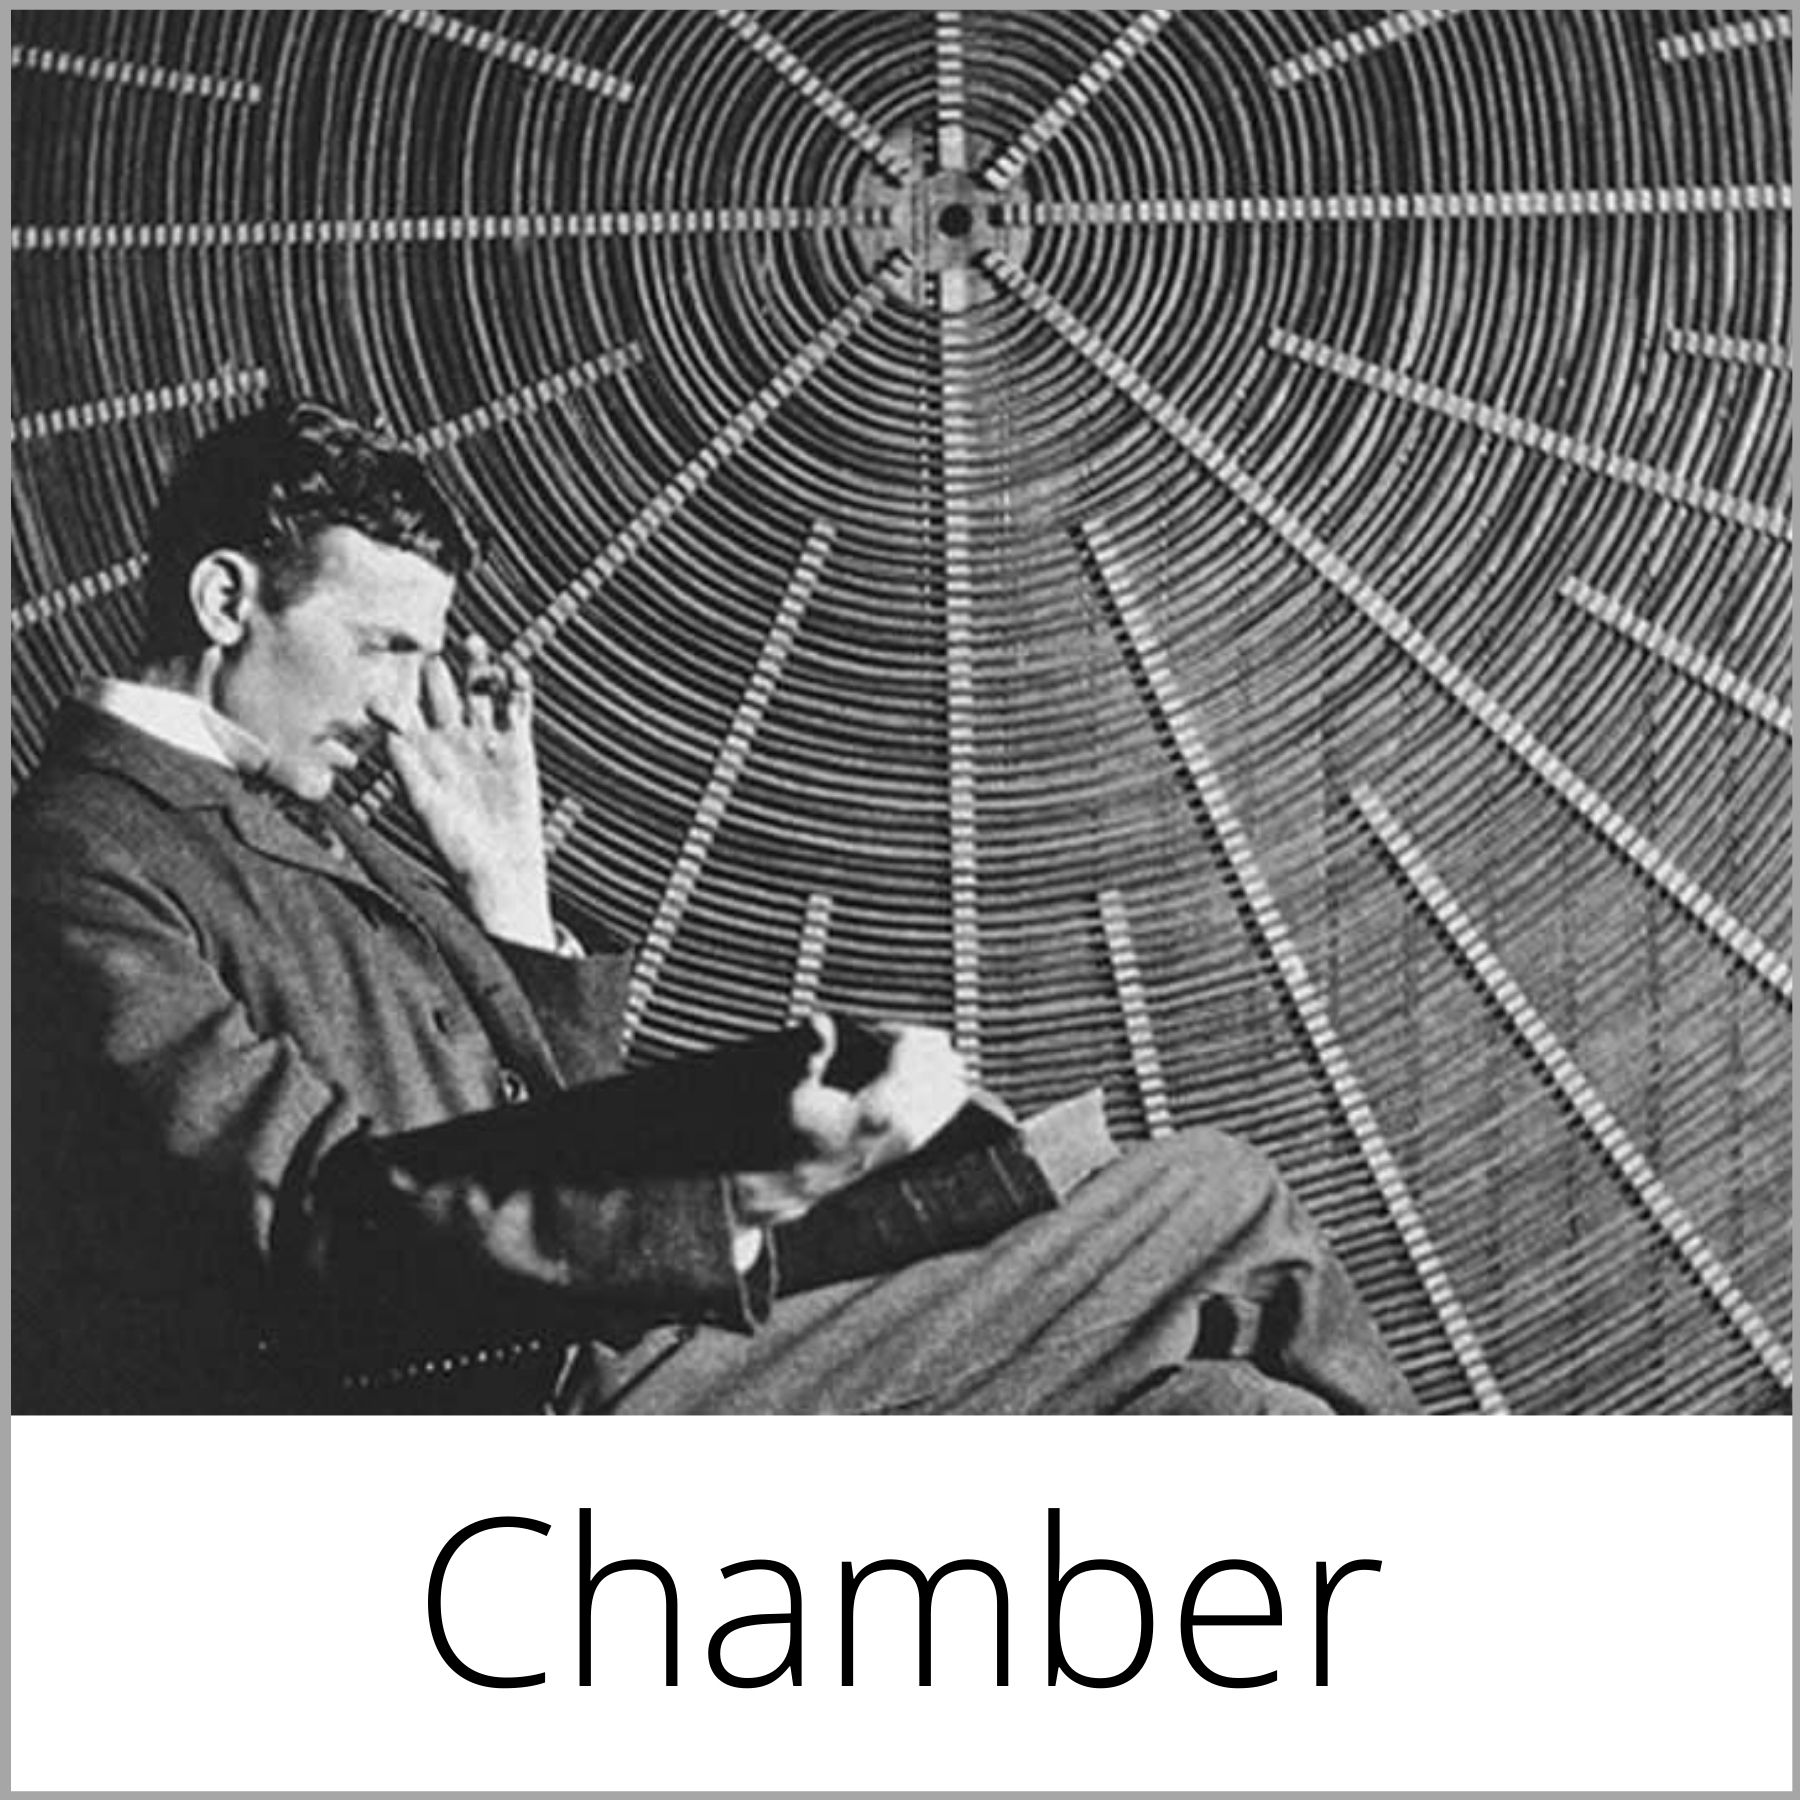 Learn about the chamber!